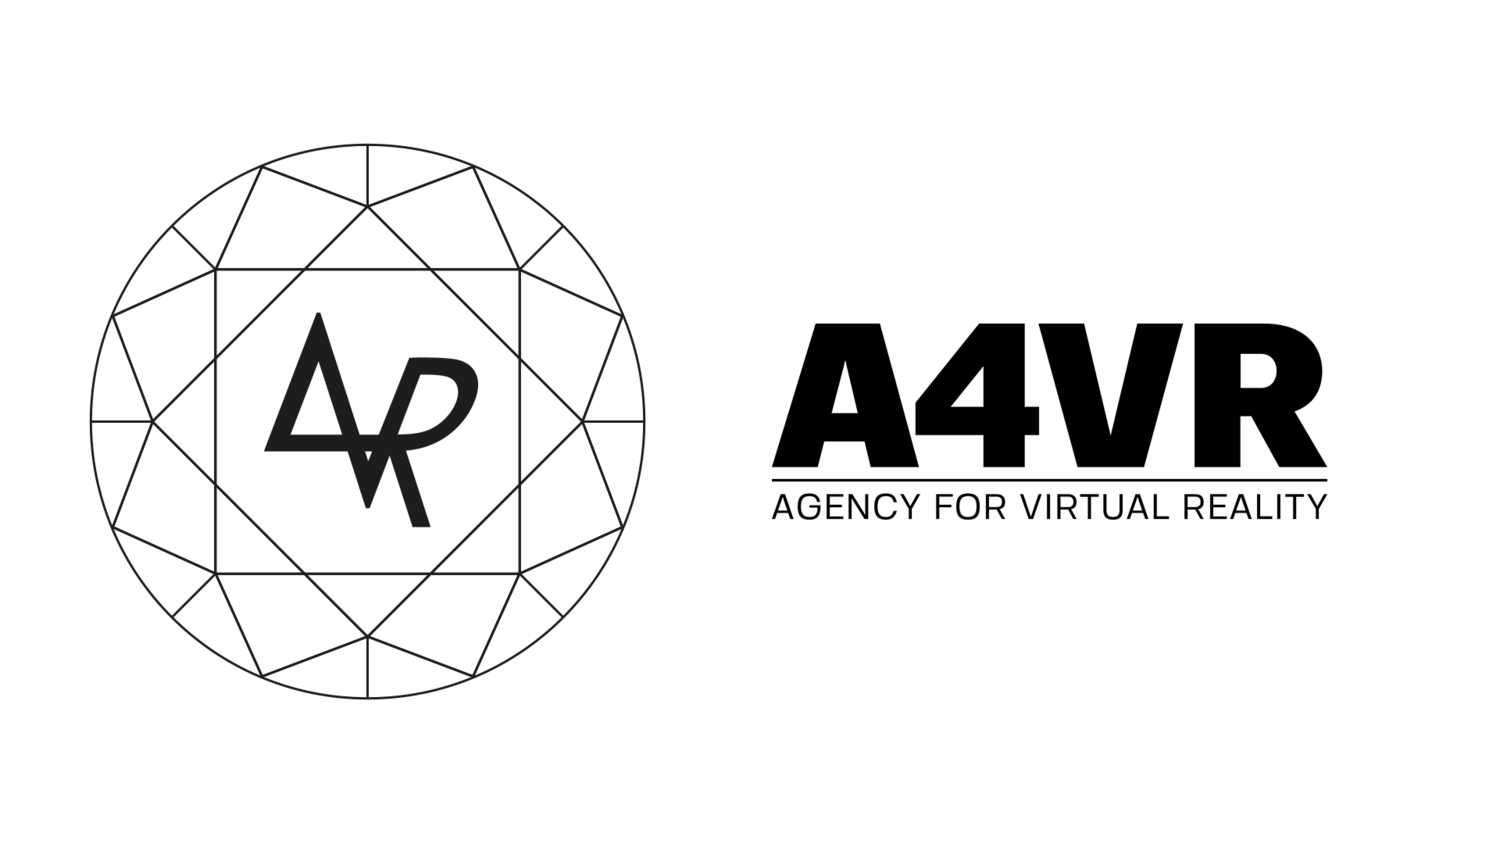 A4VR The Agency for Virtual Reality